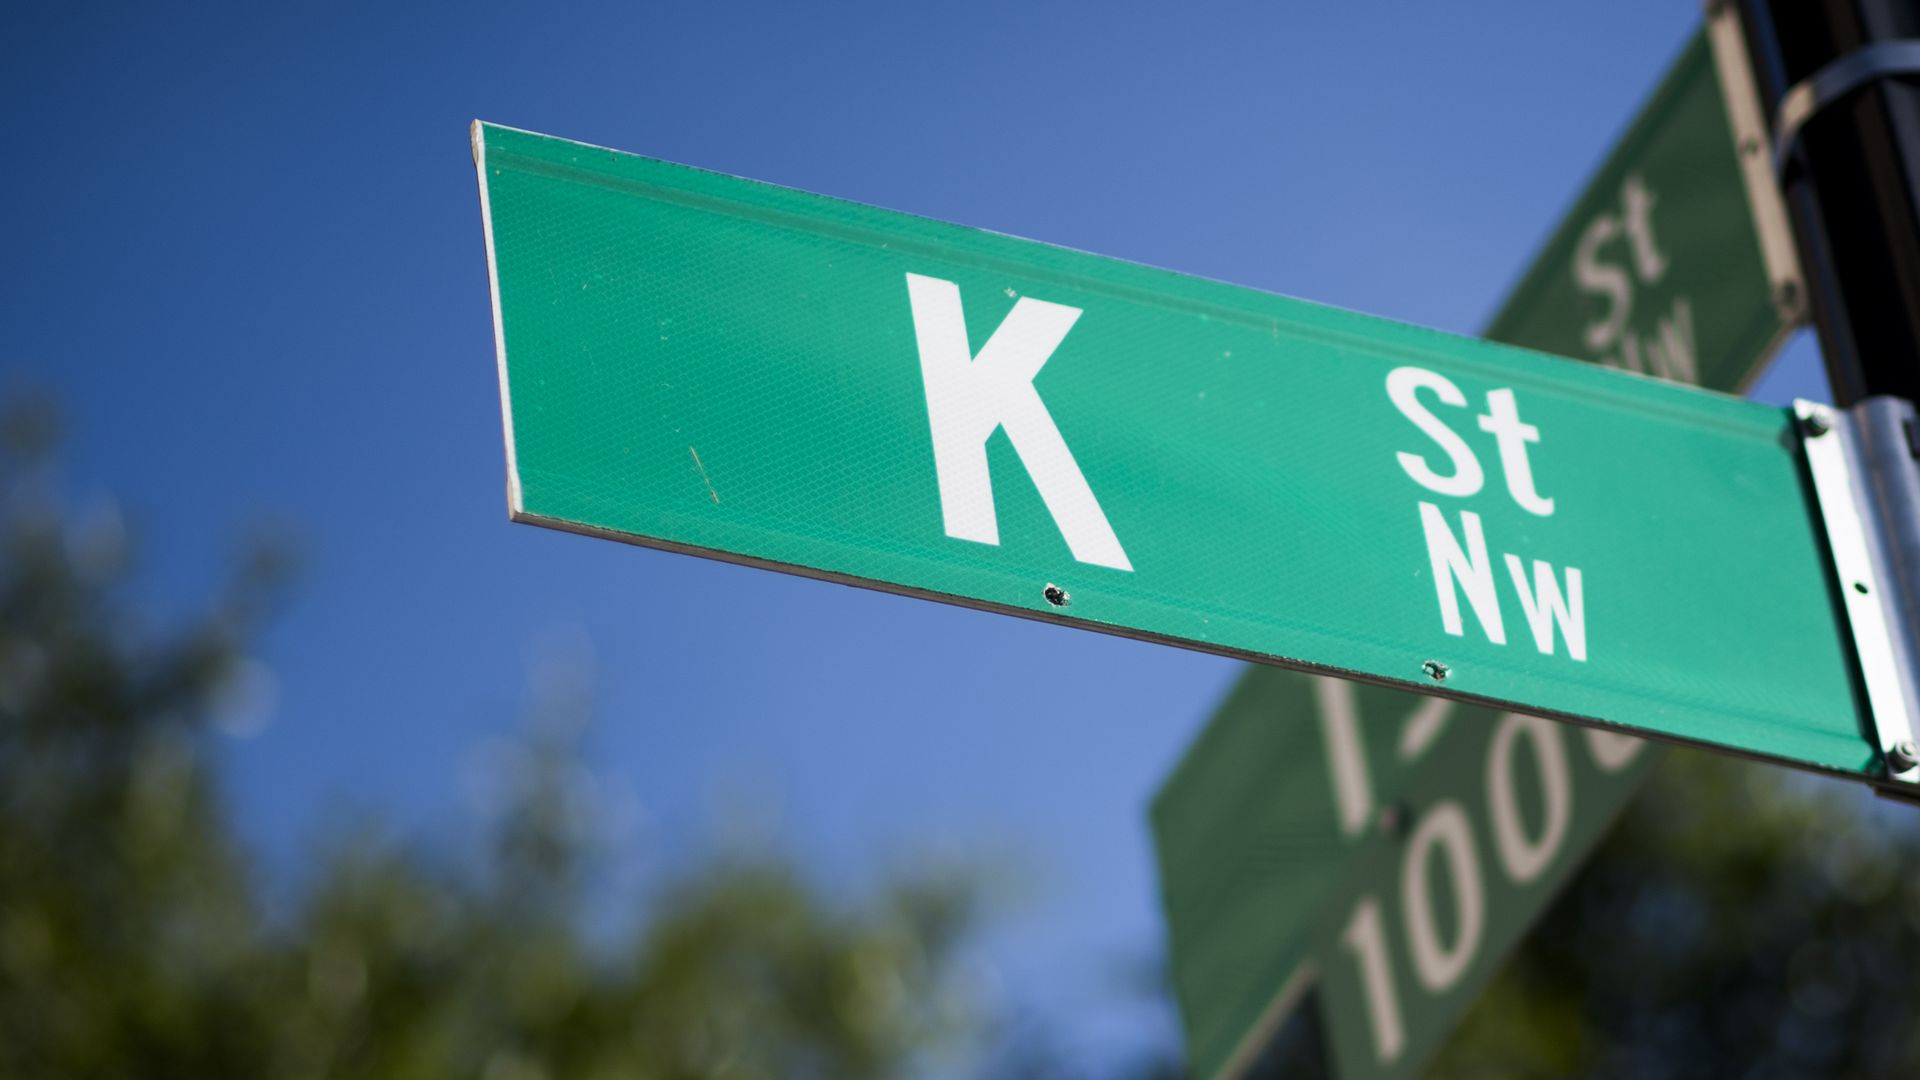 K street sign, in a reference to the lobbying hub in D.C.